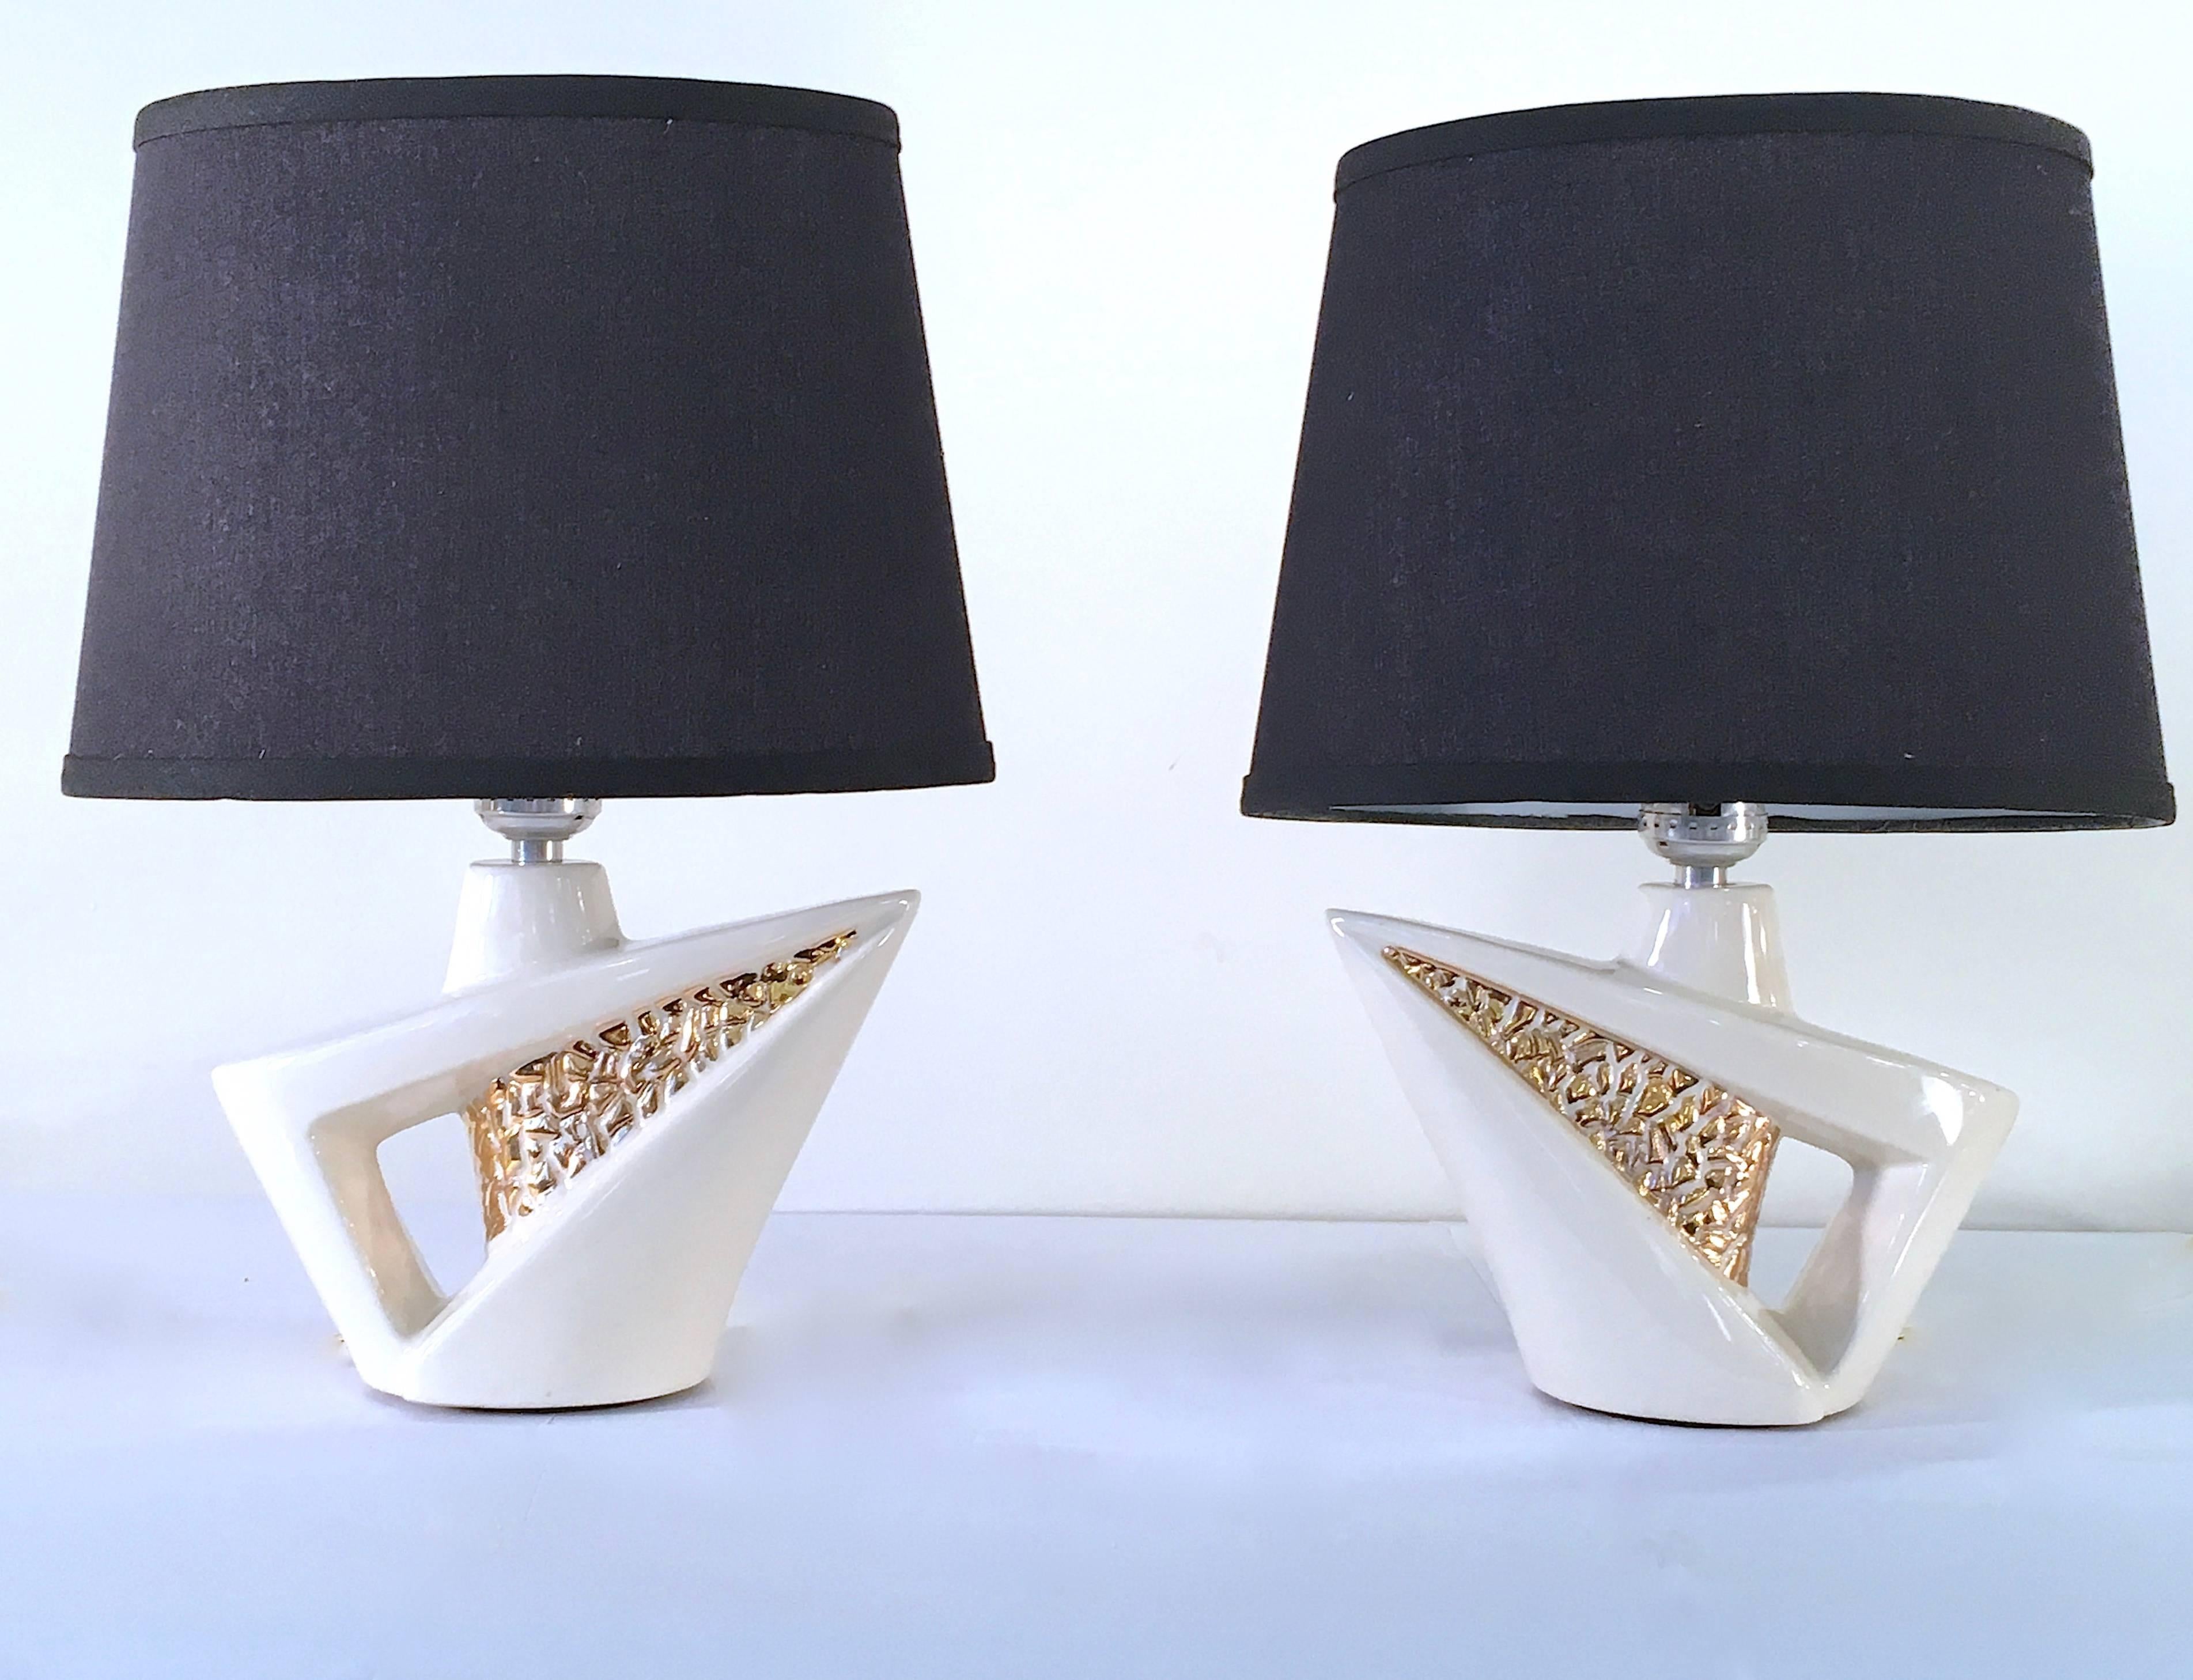 Charming pair of sculptural modernist lamps in a small, versatile scale. The lamps are ceramic in a cream colored glaze with gold accenting. Please contact for location. 